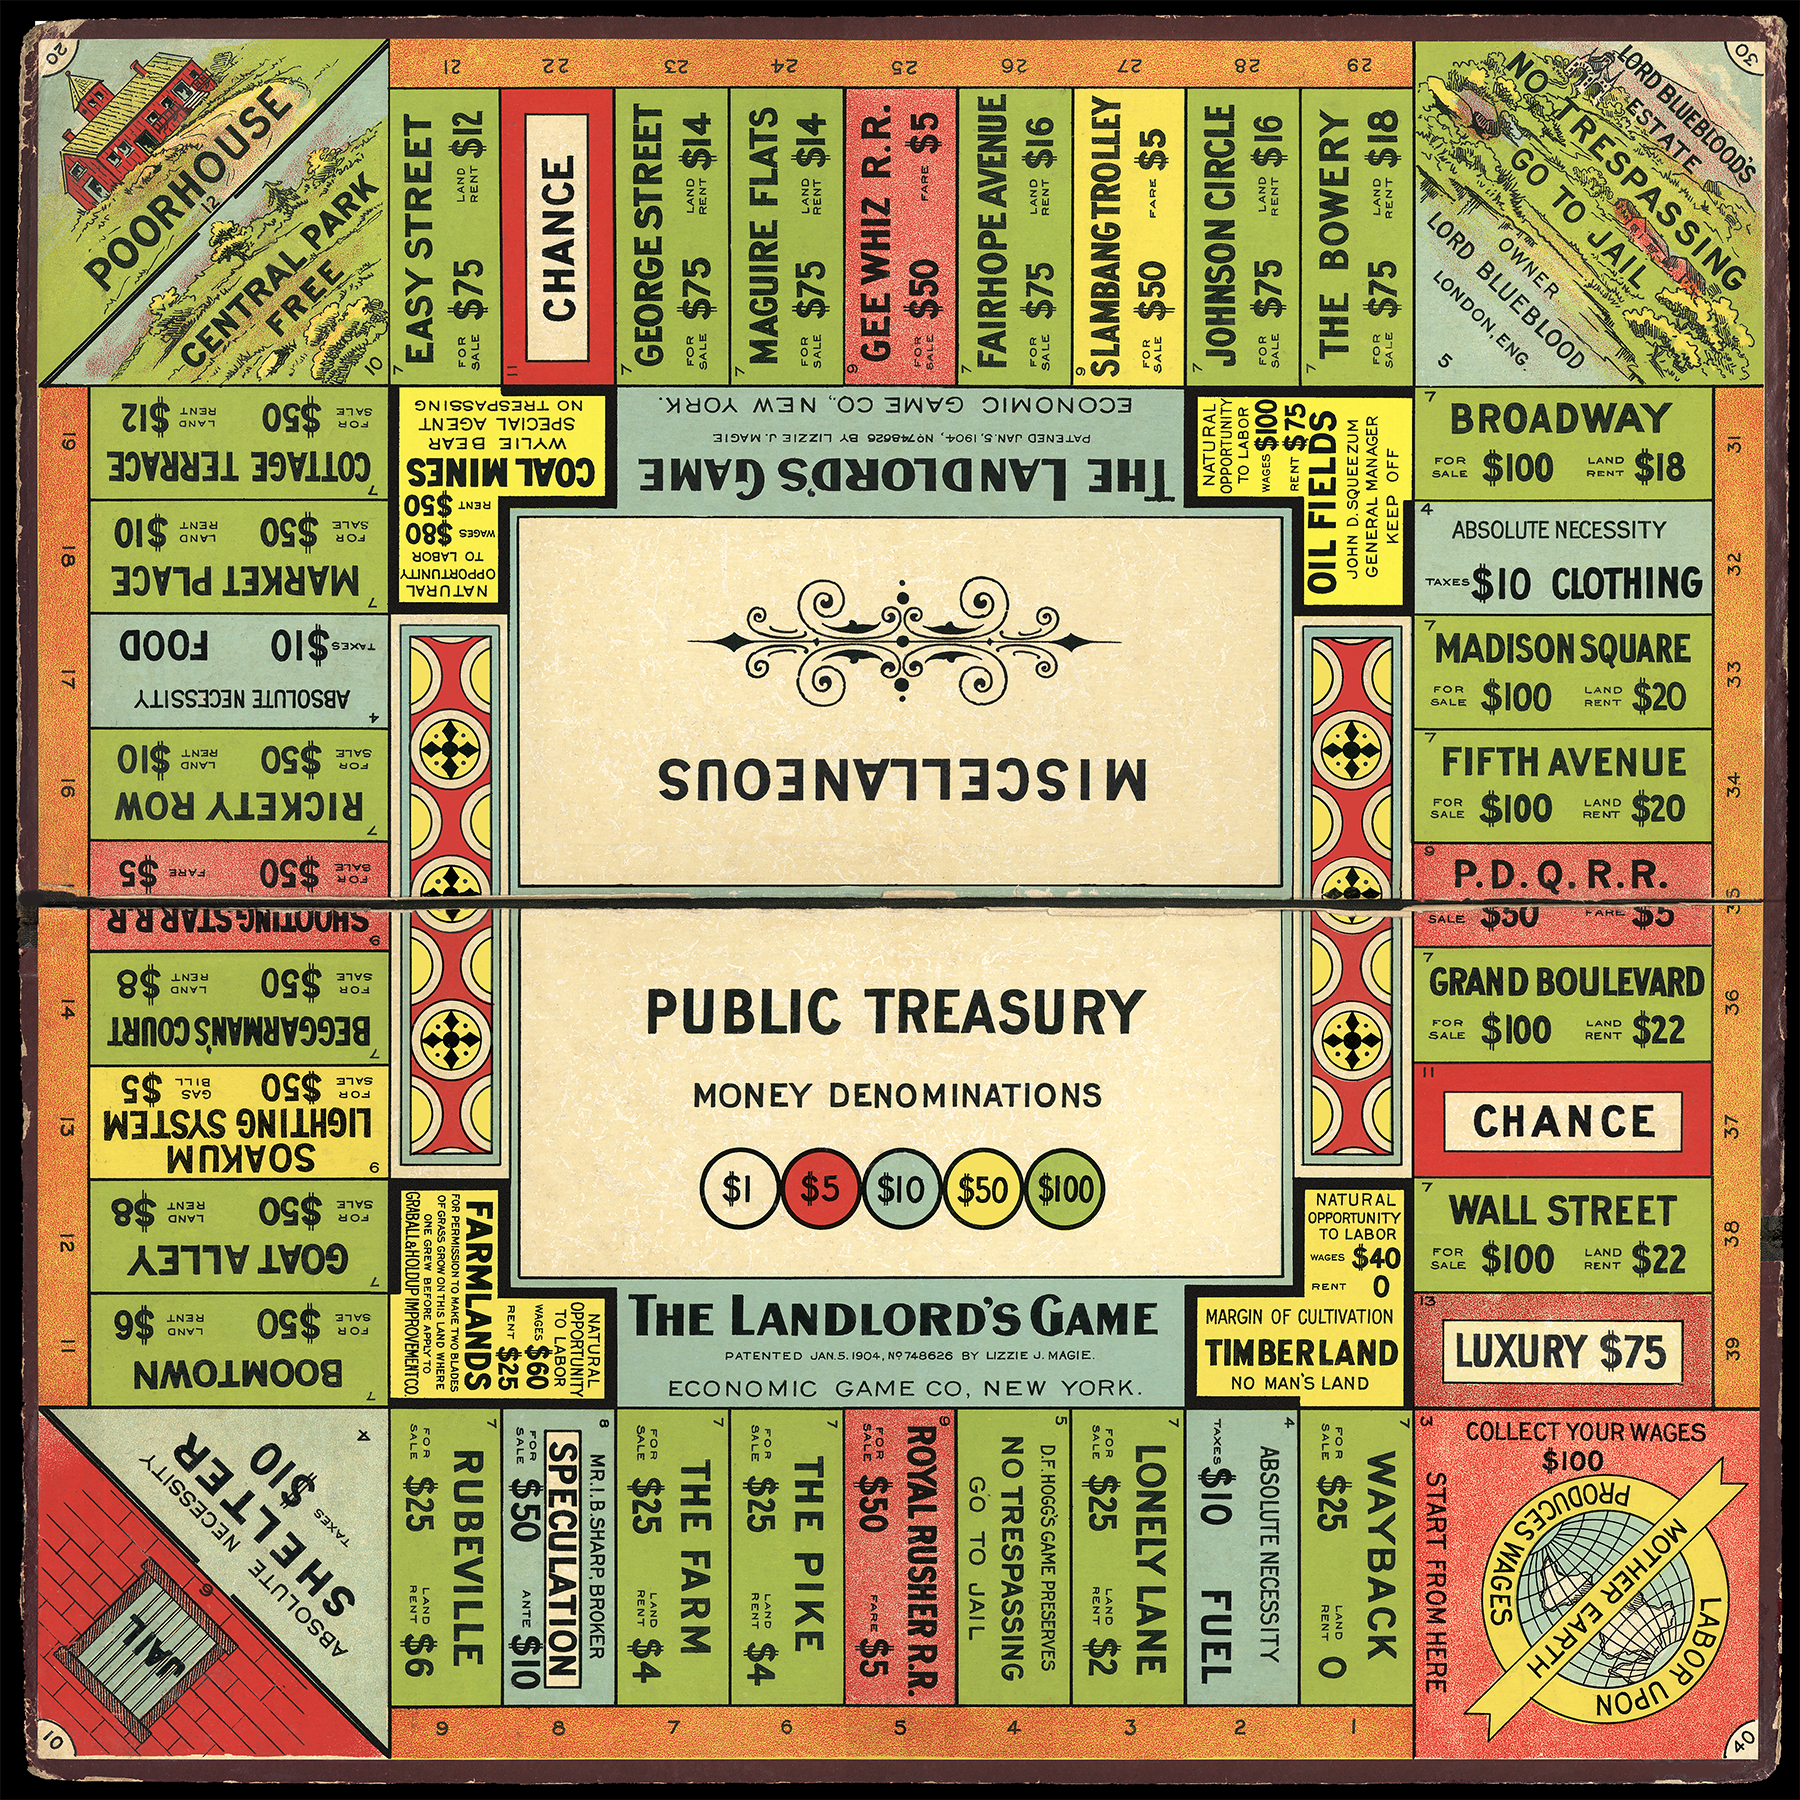 A History of Board Games - Local Histories